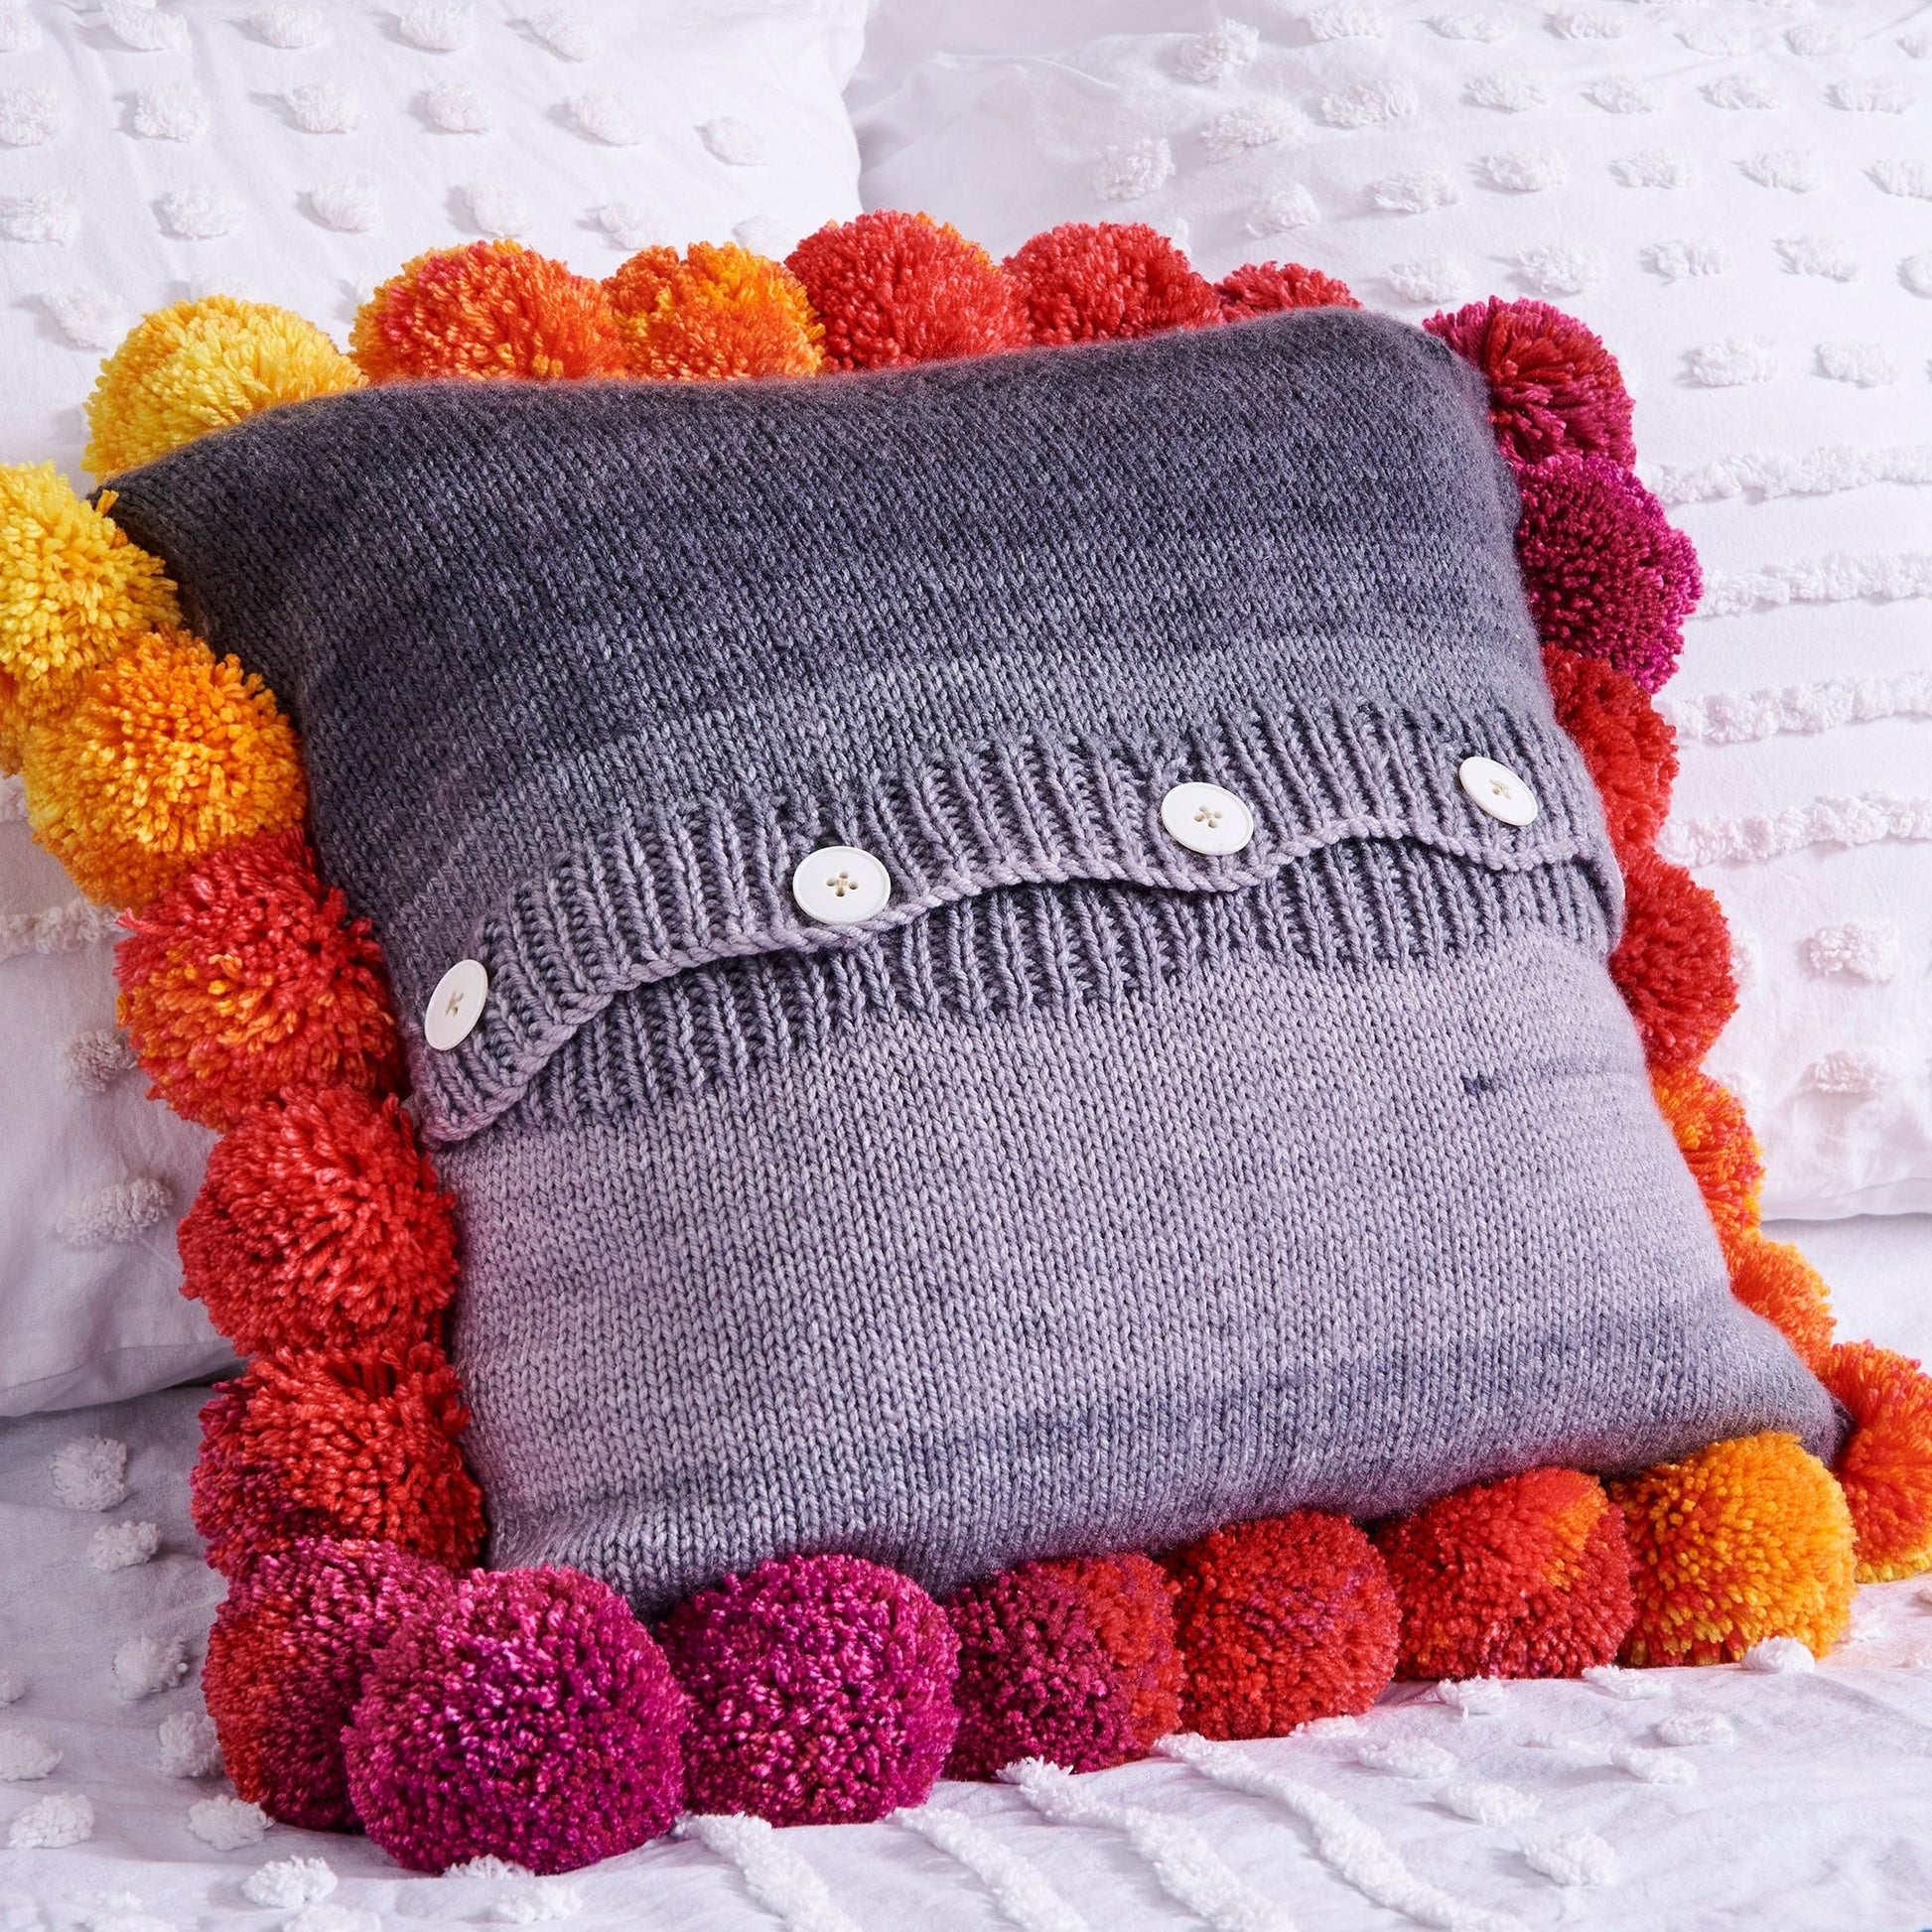 Free Red Heart Good Vibes Knit Pillow Pattern